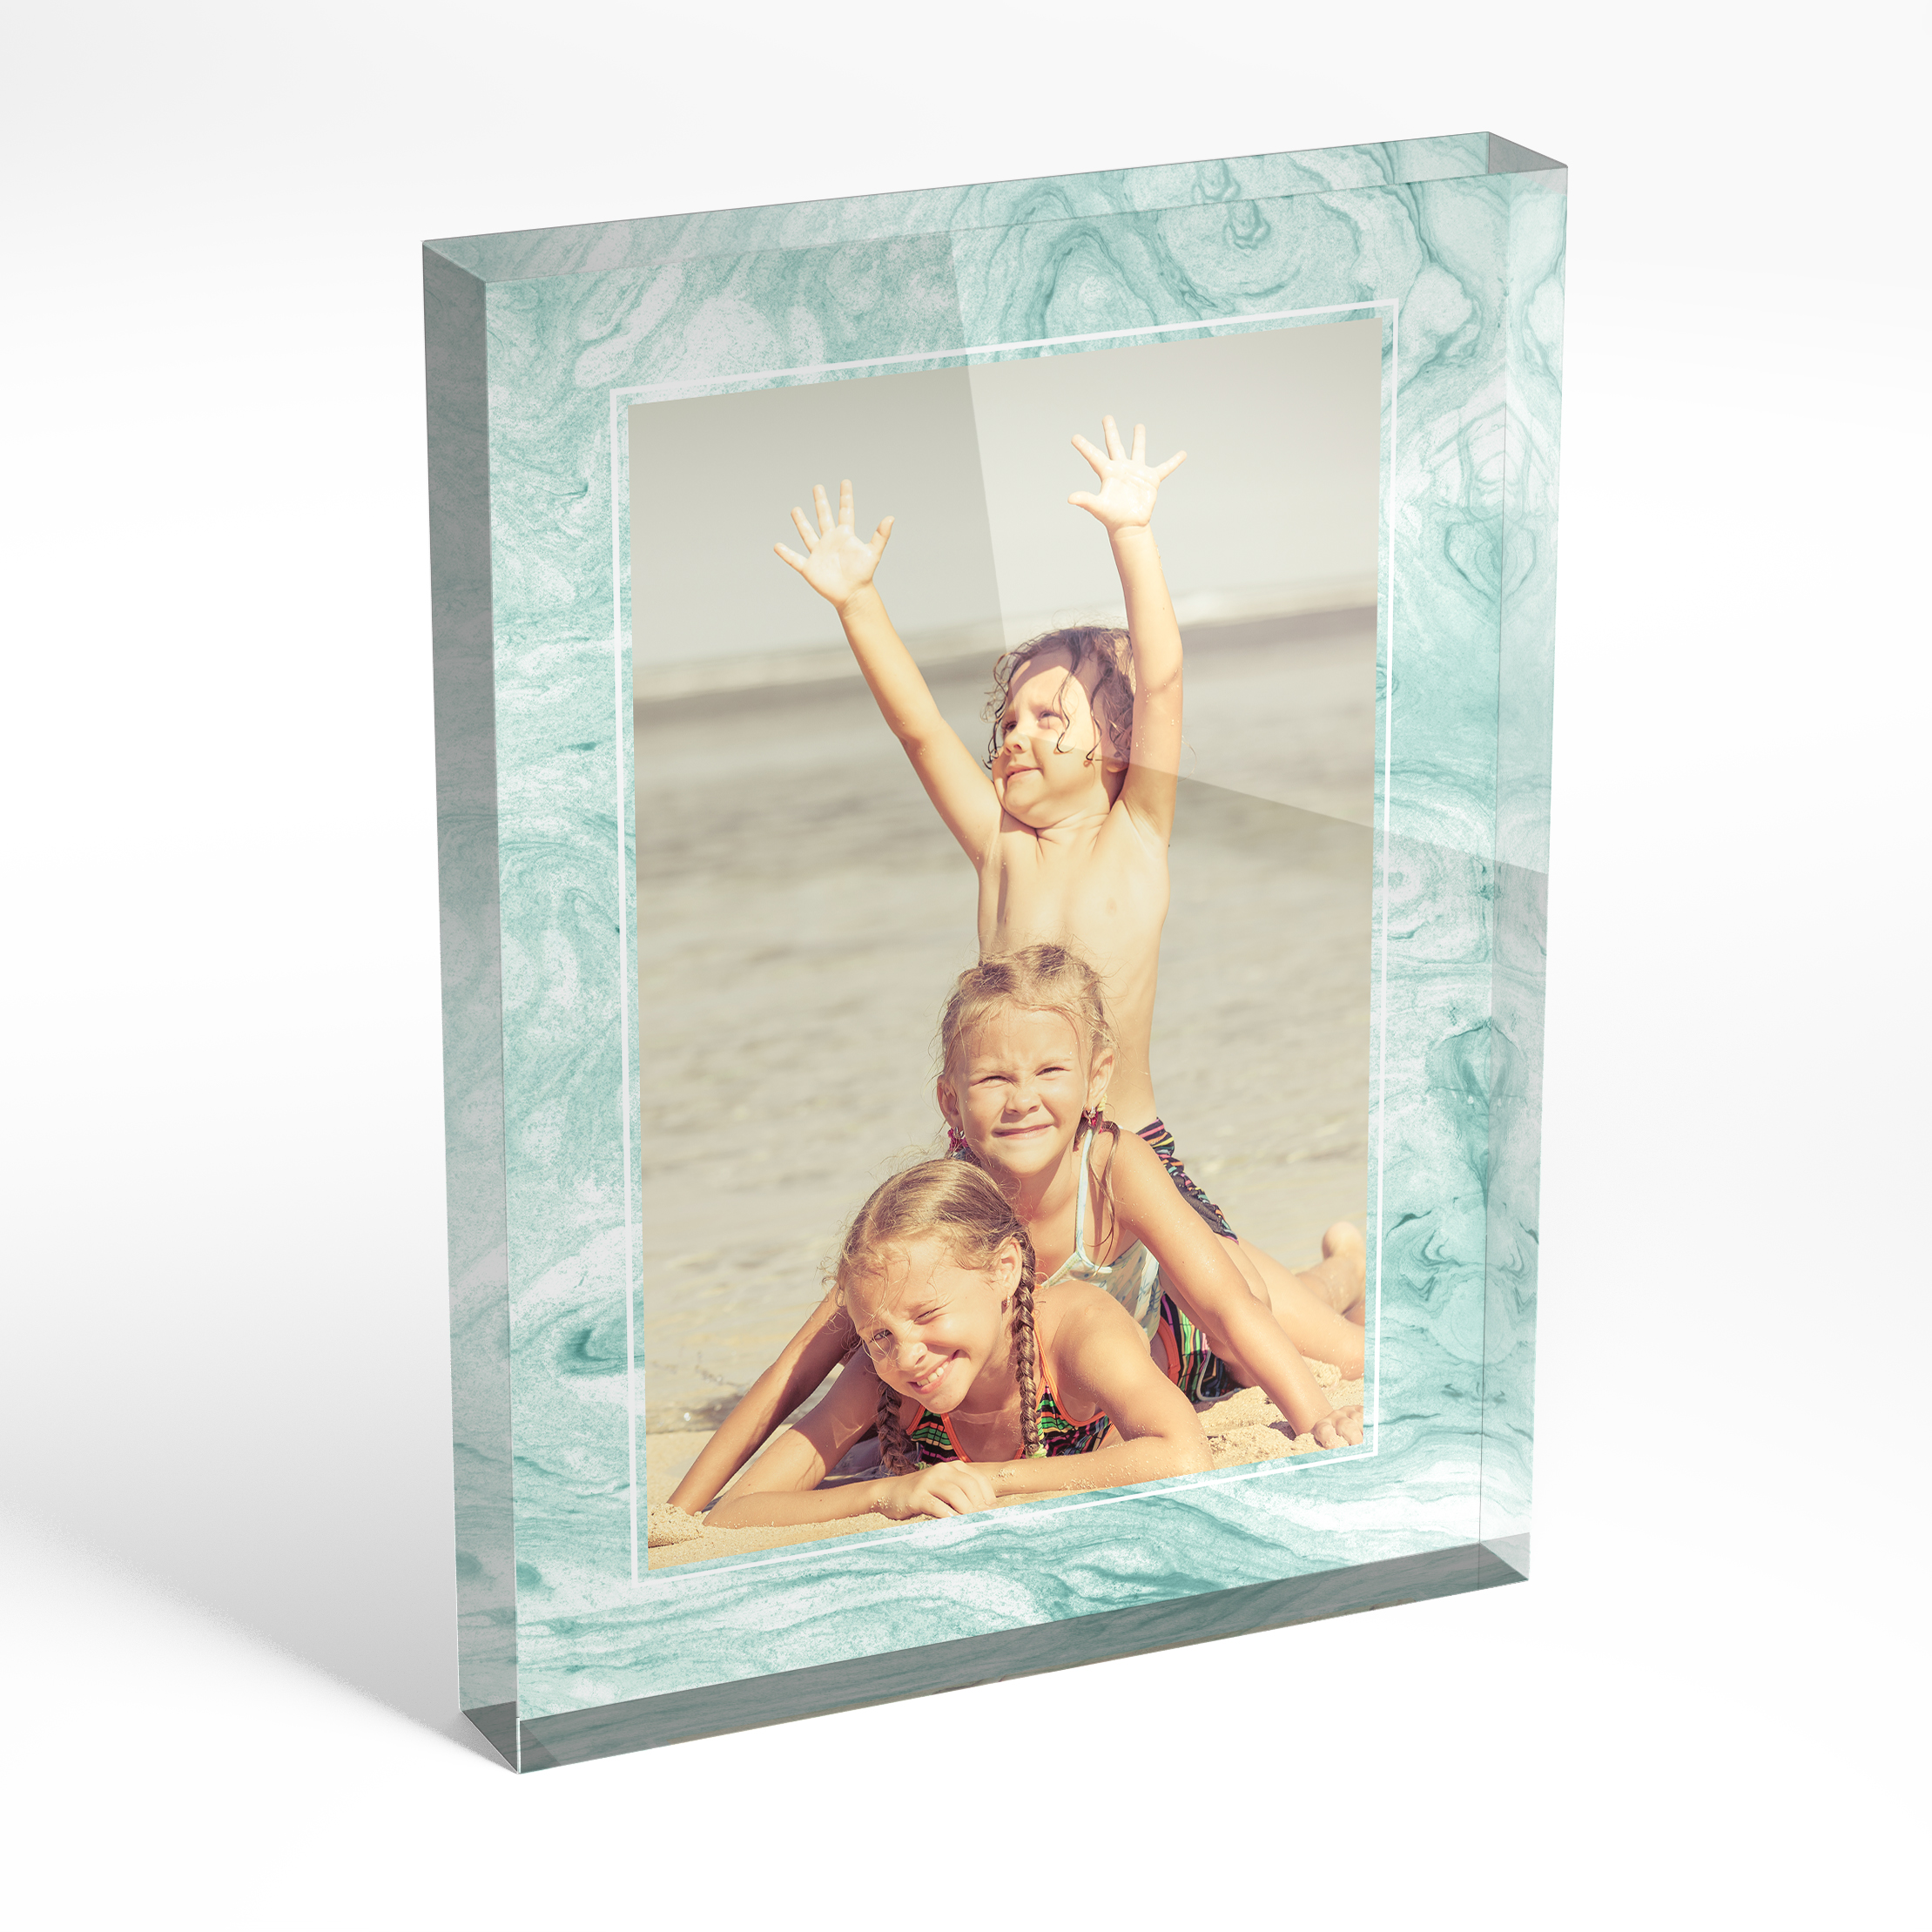 A front side view of a portrait layout Acrylic Glass Photo Block with space for 1 photo. Thiis design is named 'Treasured Frame'. 